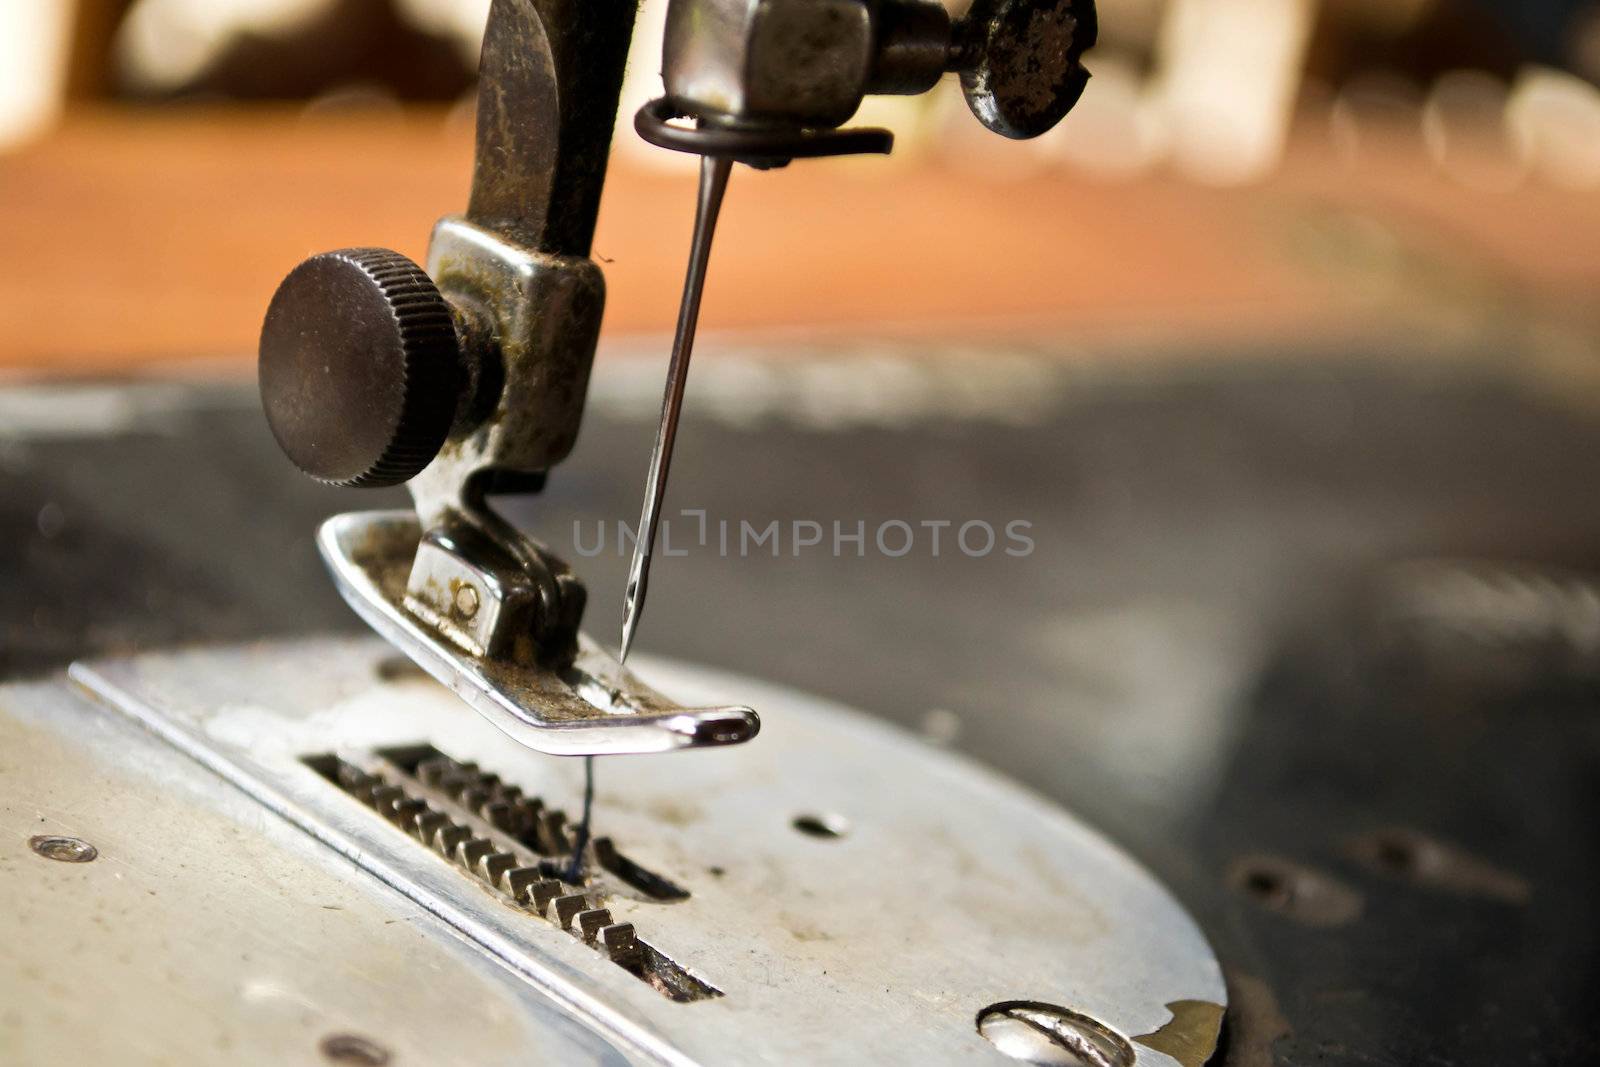 sewing process in the phase by Thanamat